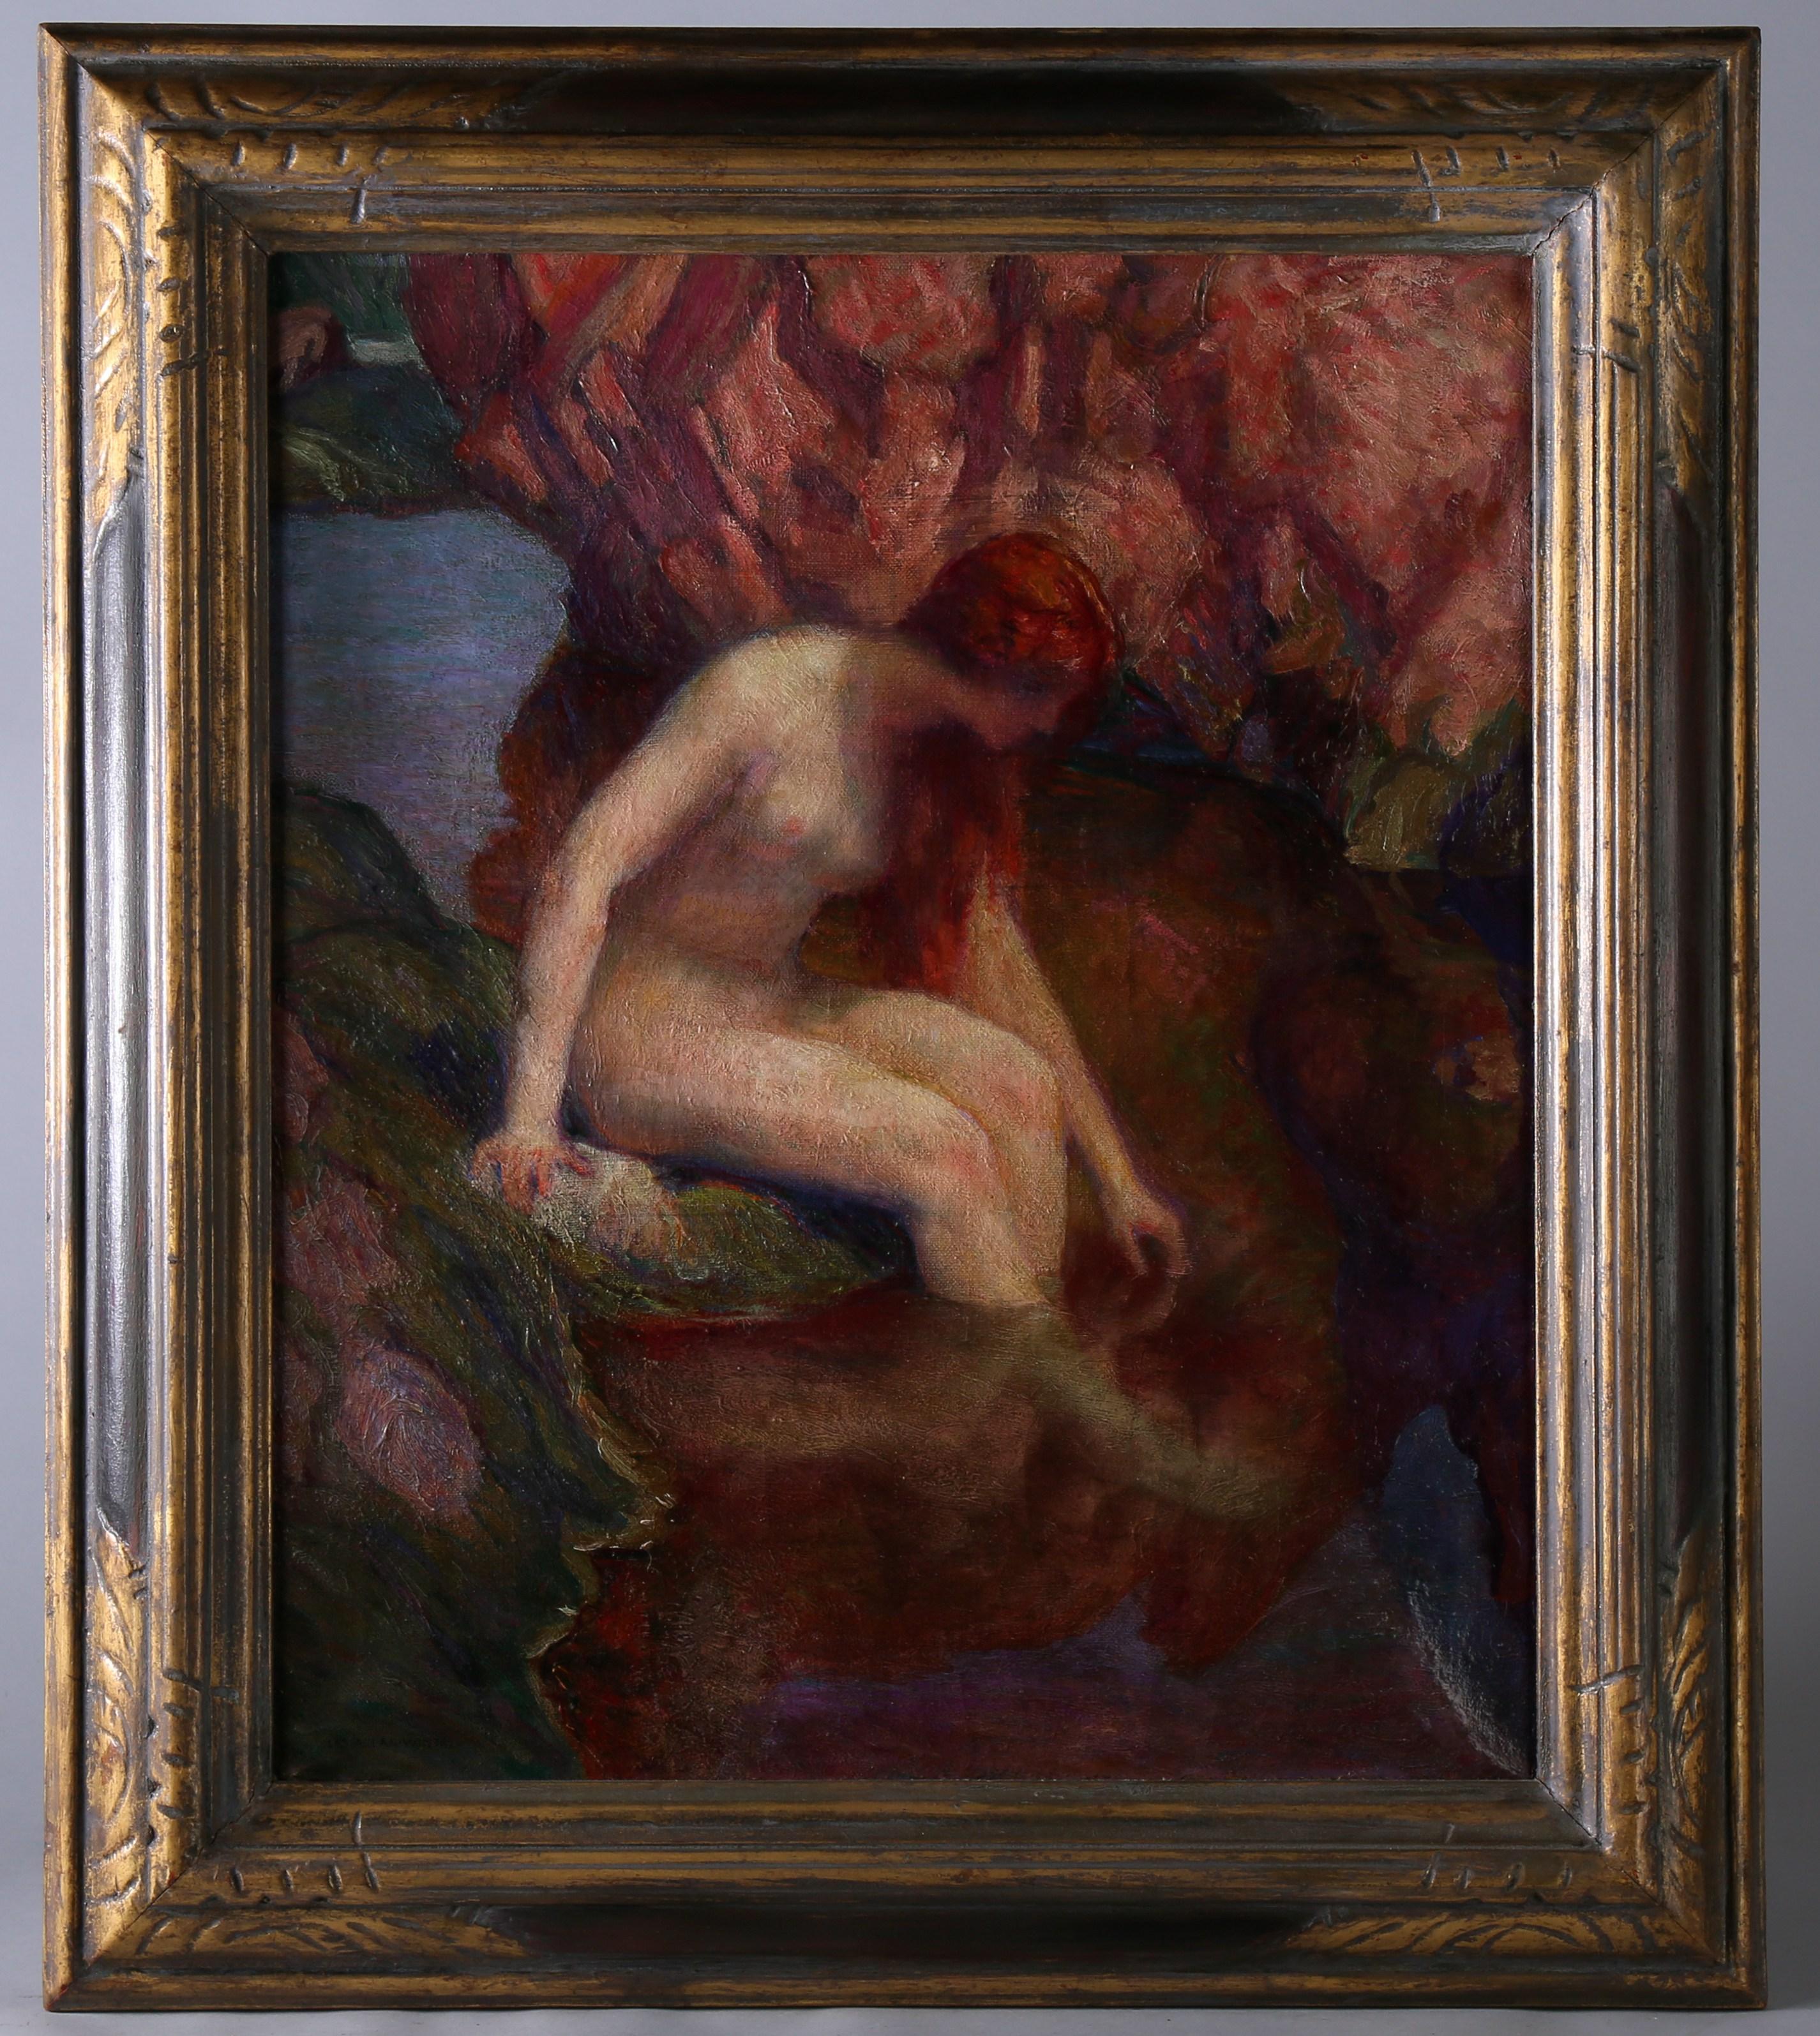 Charles Allan Winter Nude Painting - Her Reflection In A Stream